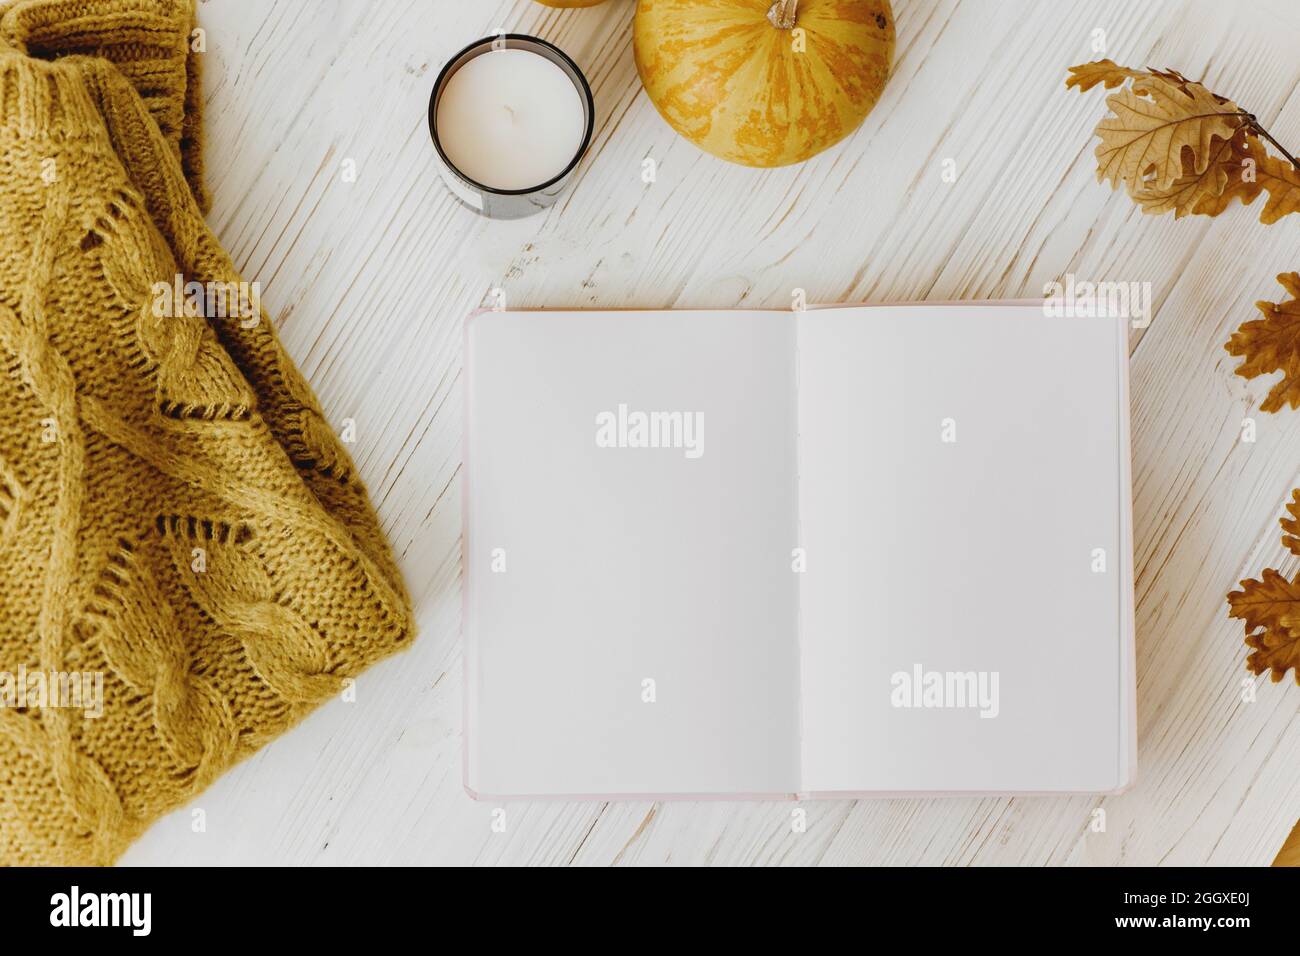 Autumn flat lay with opened notebook, warm sweater, orange pumpkin, candle and yellow autumn leaves on white wooden background. Stock Photo